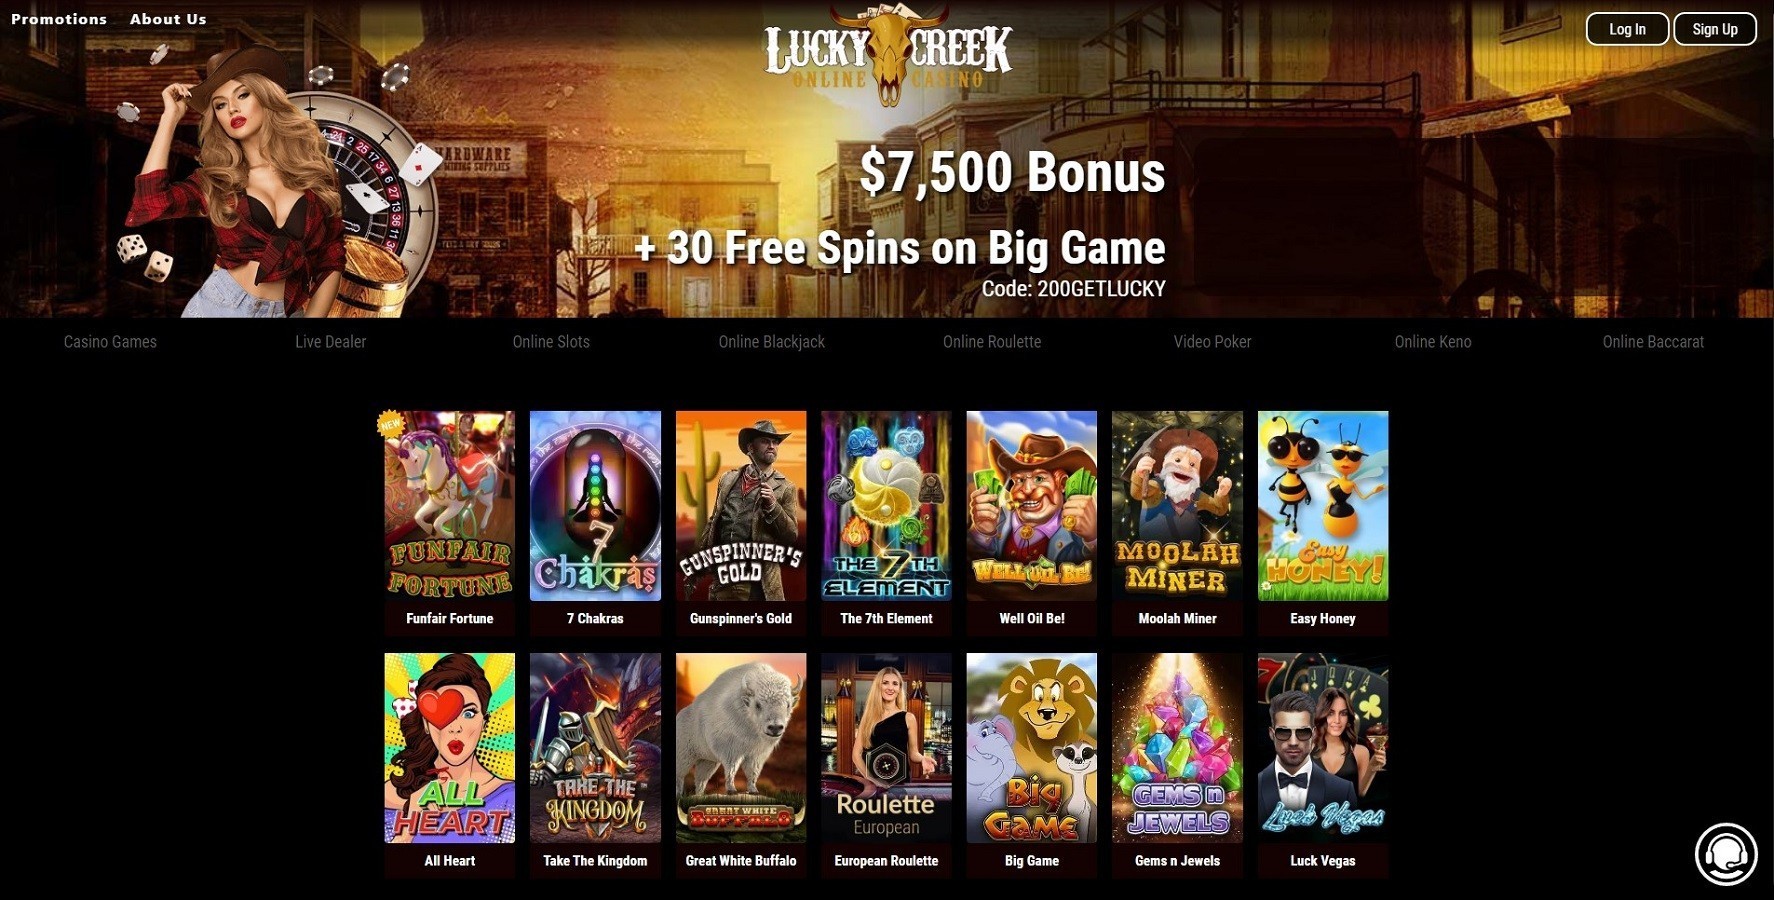 About Lucky Creek Casino